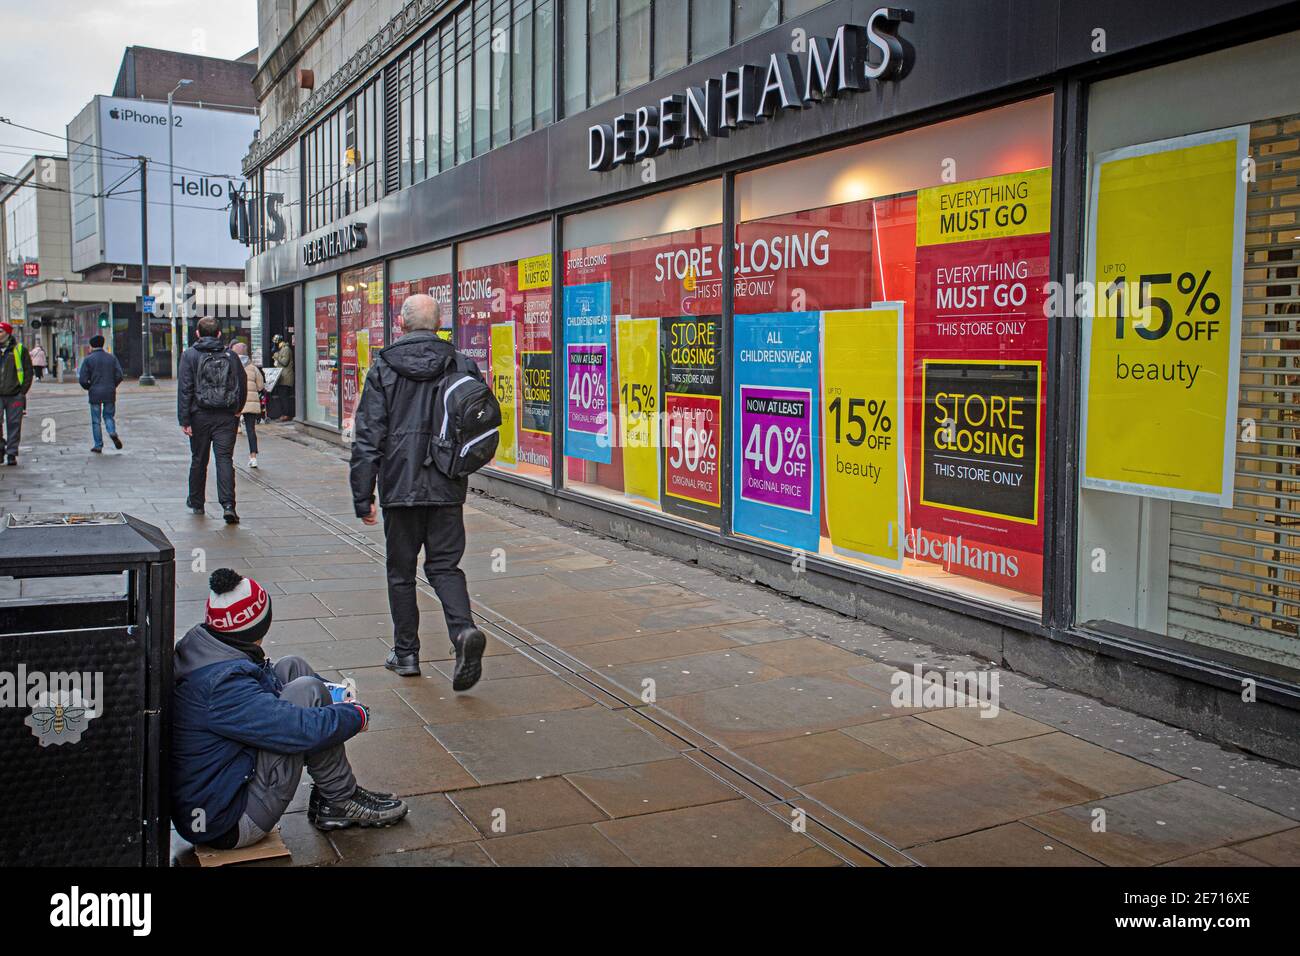 Store closing sign outside the Debenhams shop in Manchester  city centre, with people passing homeless man begging . Stock Photo